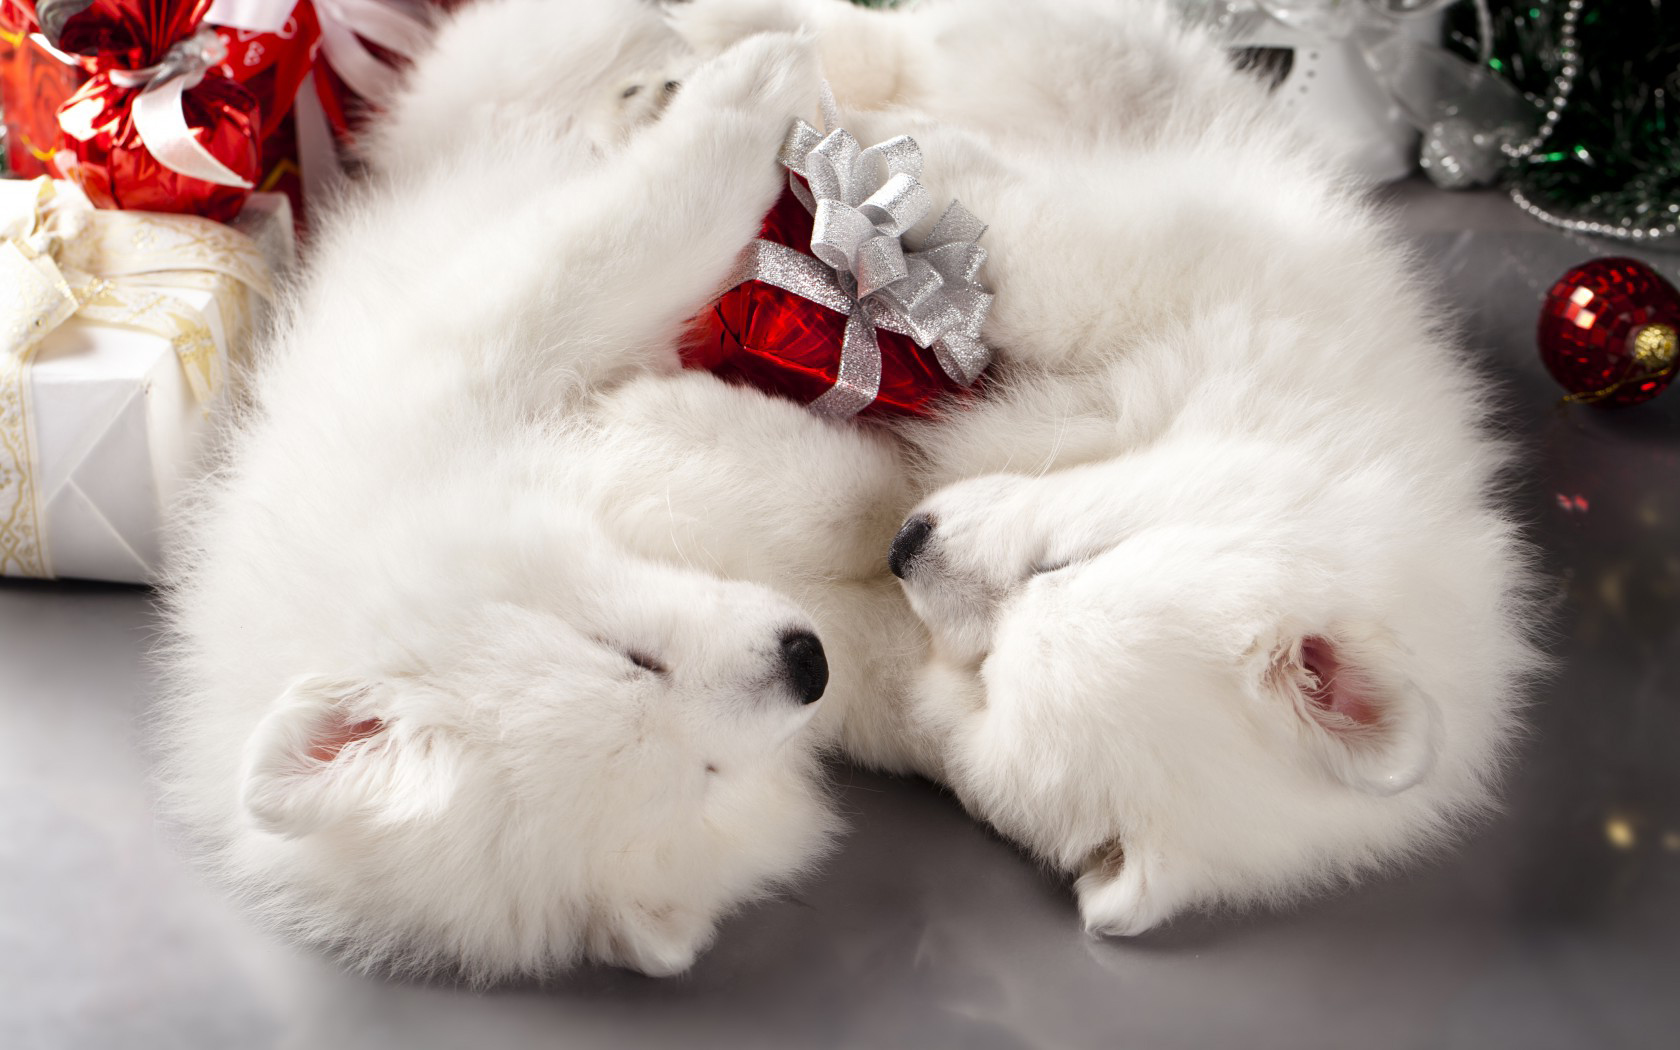 White Puppies Christmas Wallpaper Gallery Yopriceville High